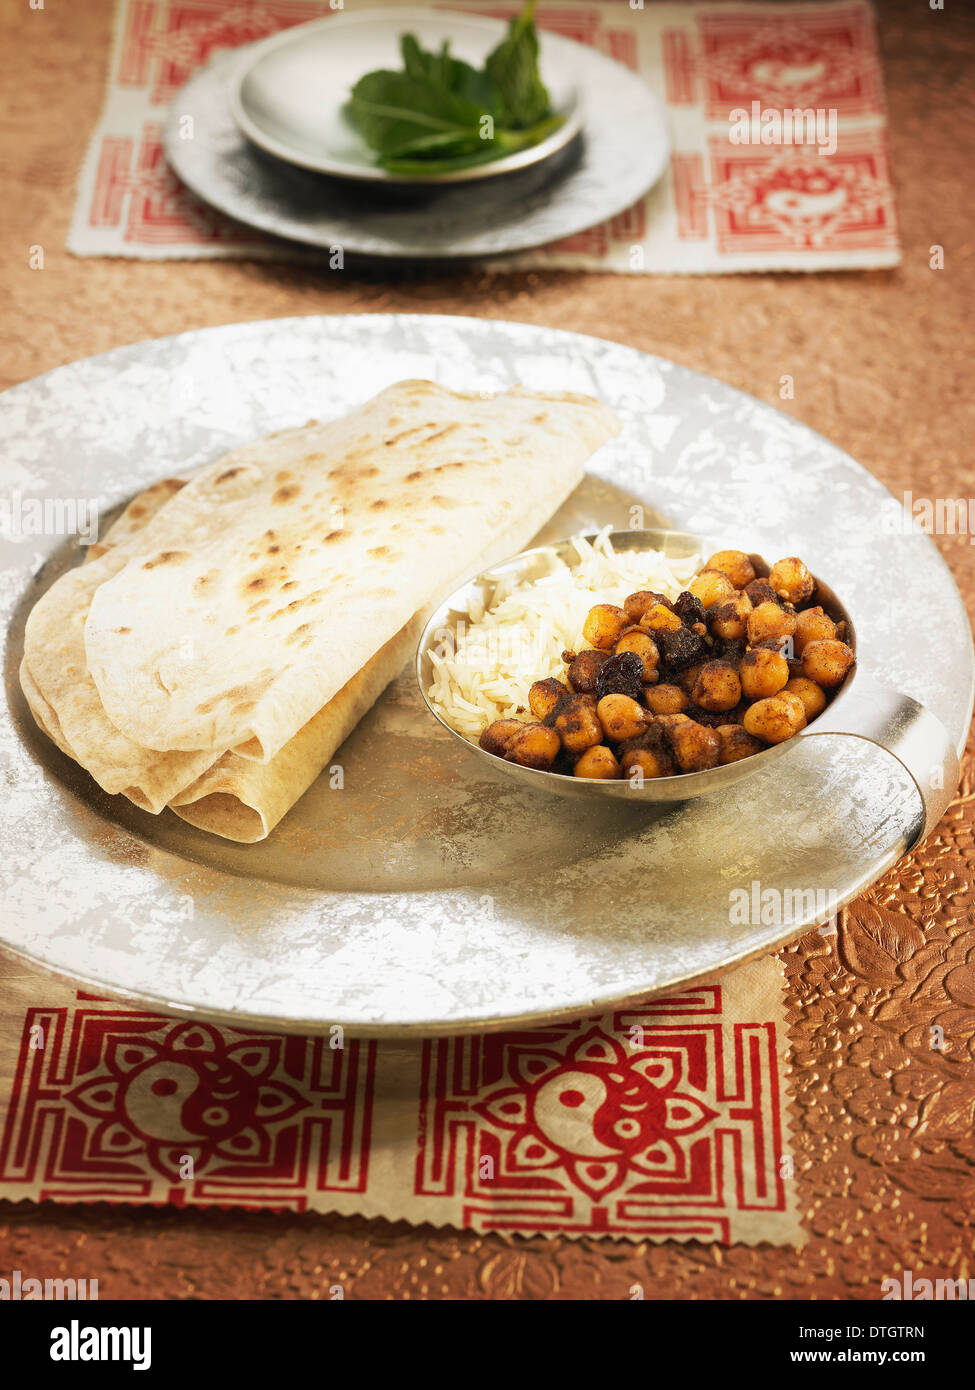 Chapatis and grilled chickpeas Stock Photo